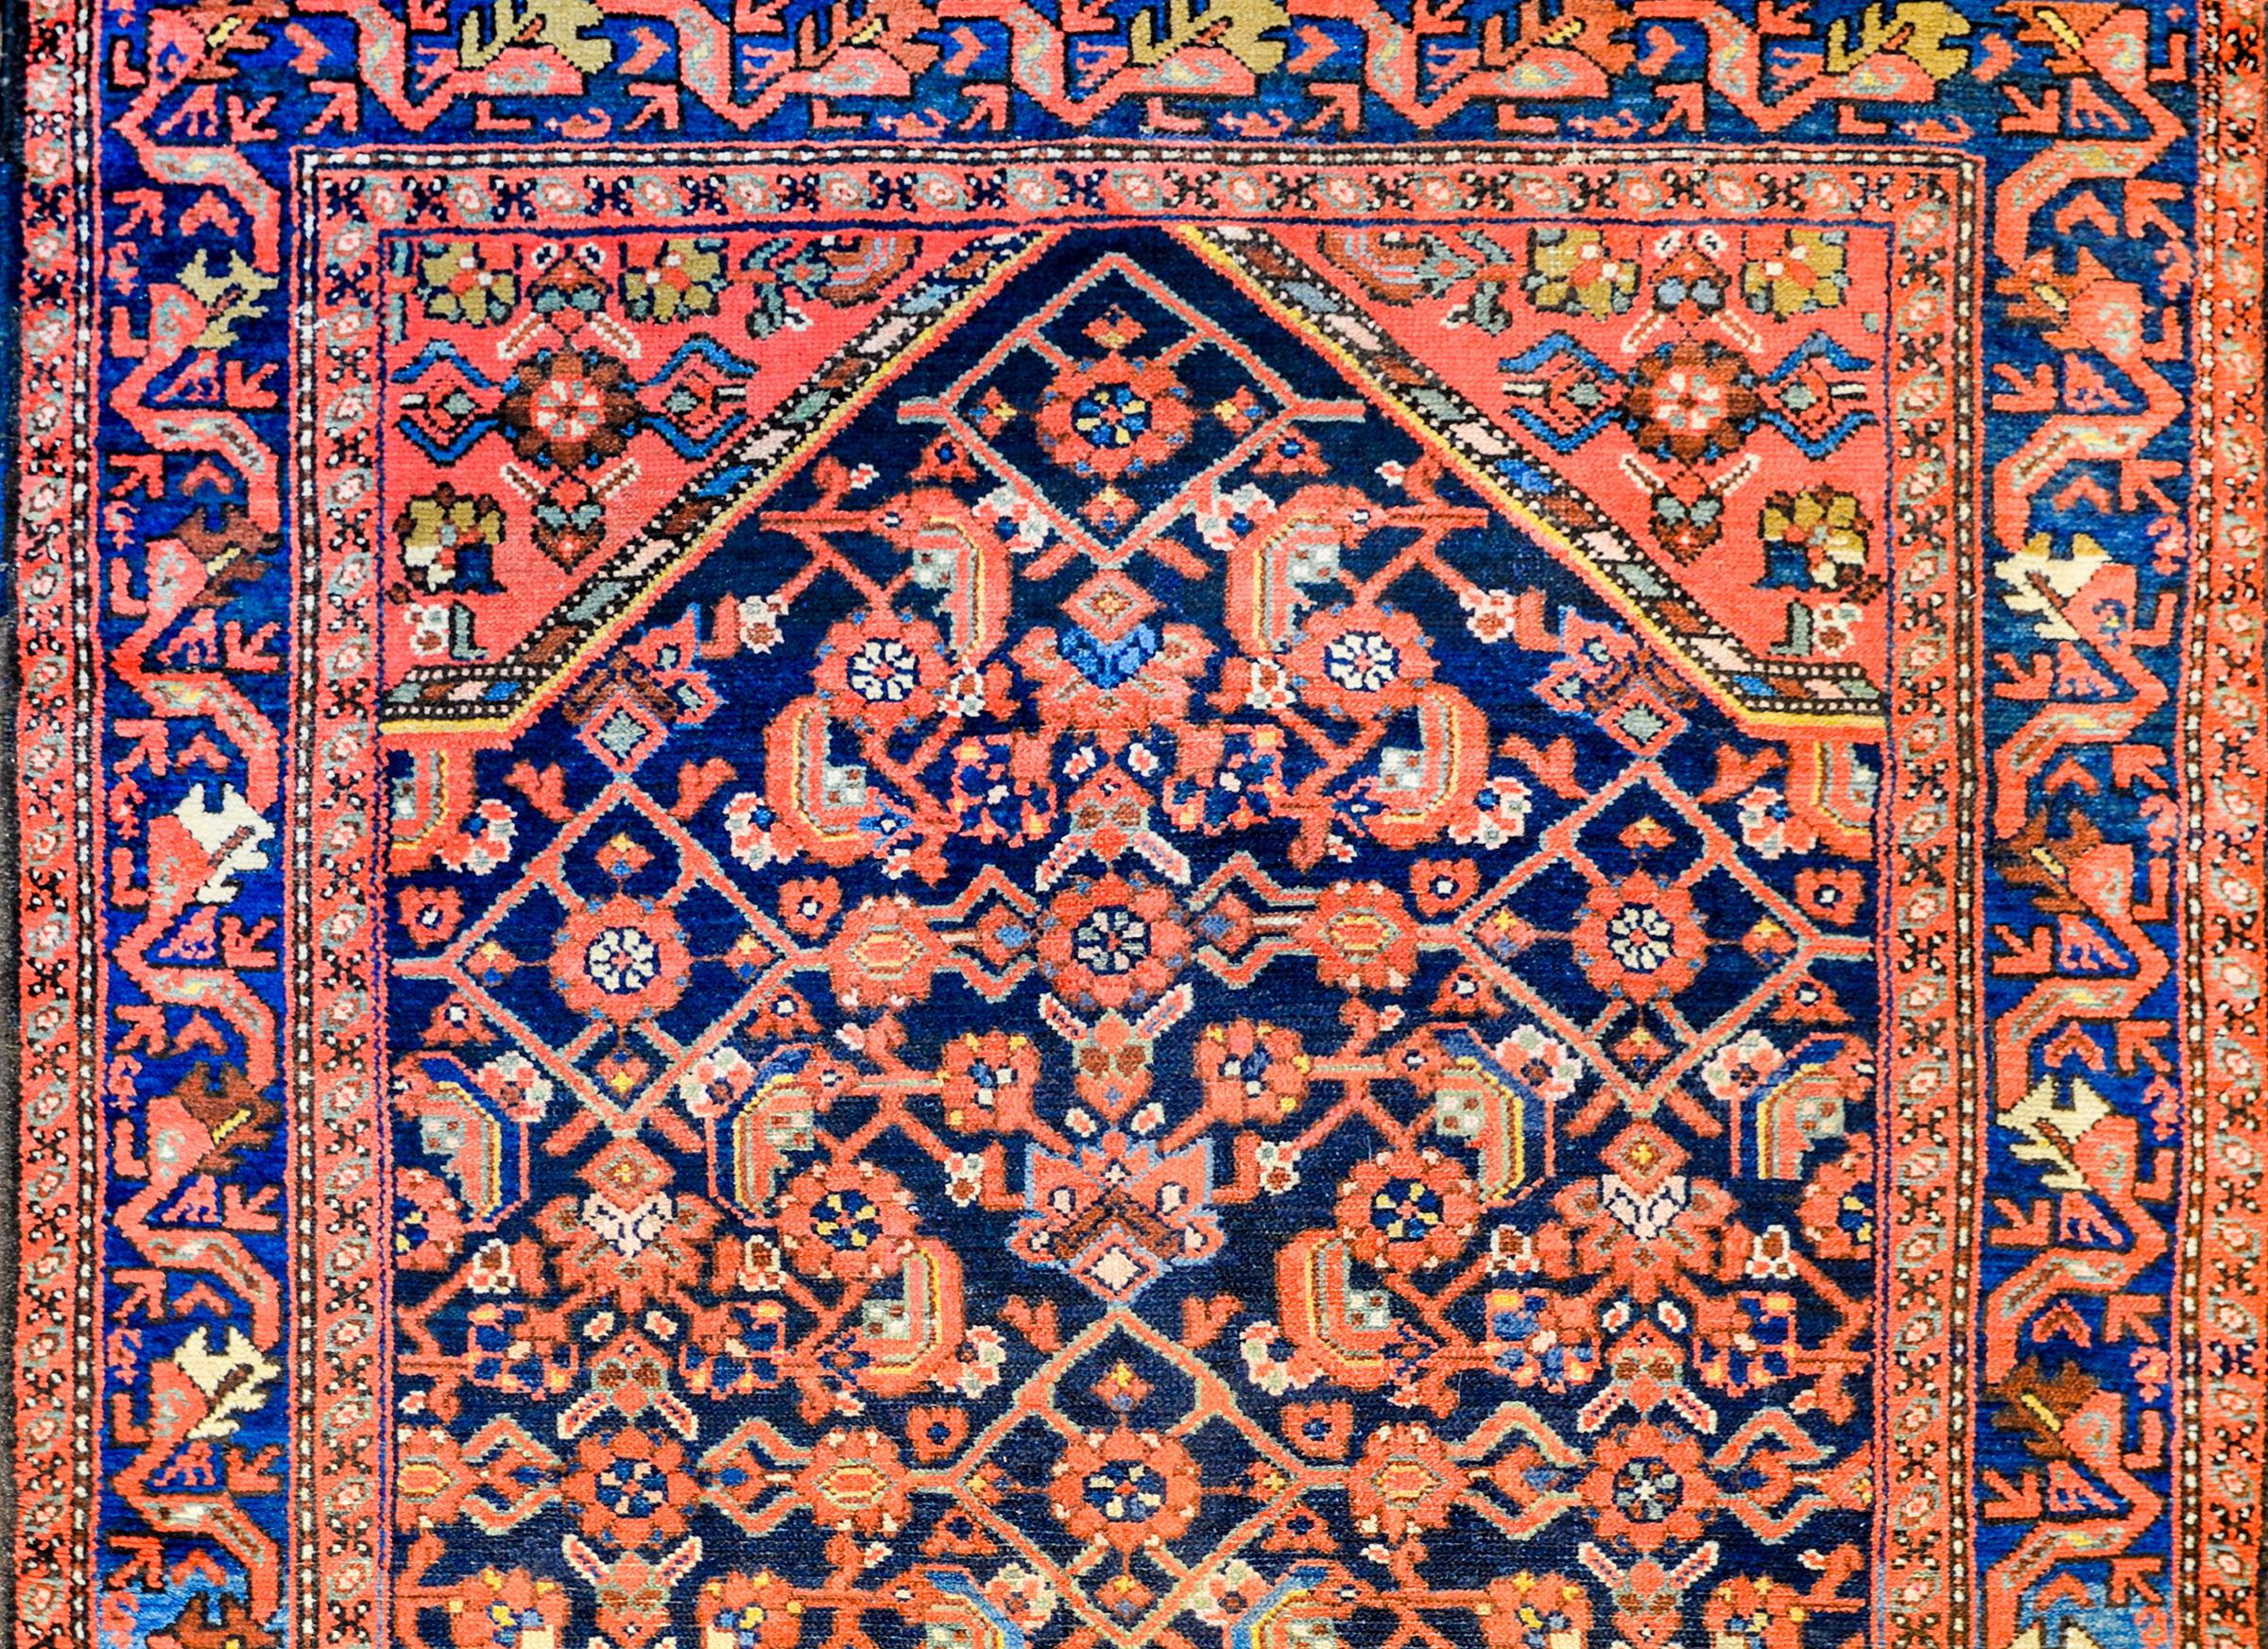 A beautiful early 20th century Persian Hamadan rug with beautiful large diamond medallion with an all-over multi-colored trellis pattern woven in crimson, salmon, light and dark indigo, white, and gold vegetable dyed wool. The border is wonderful